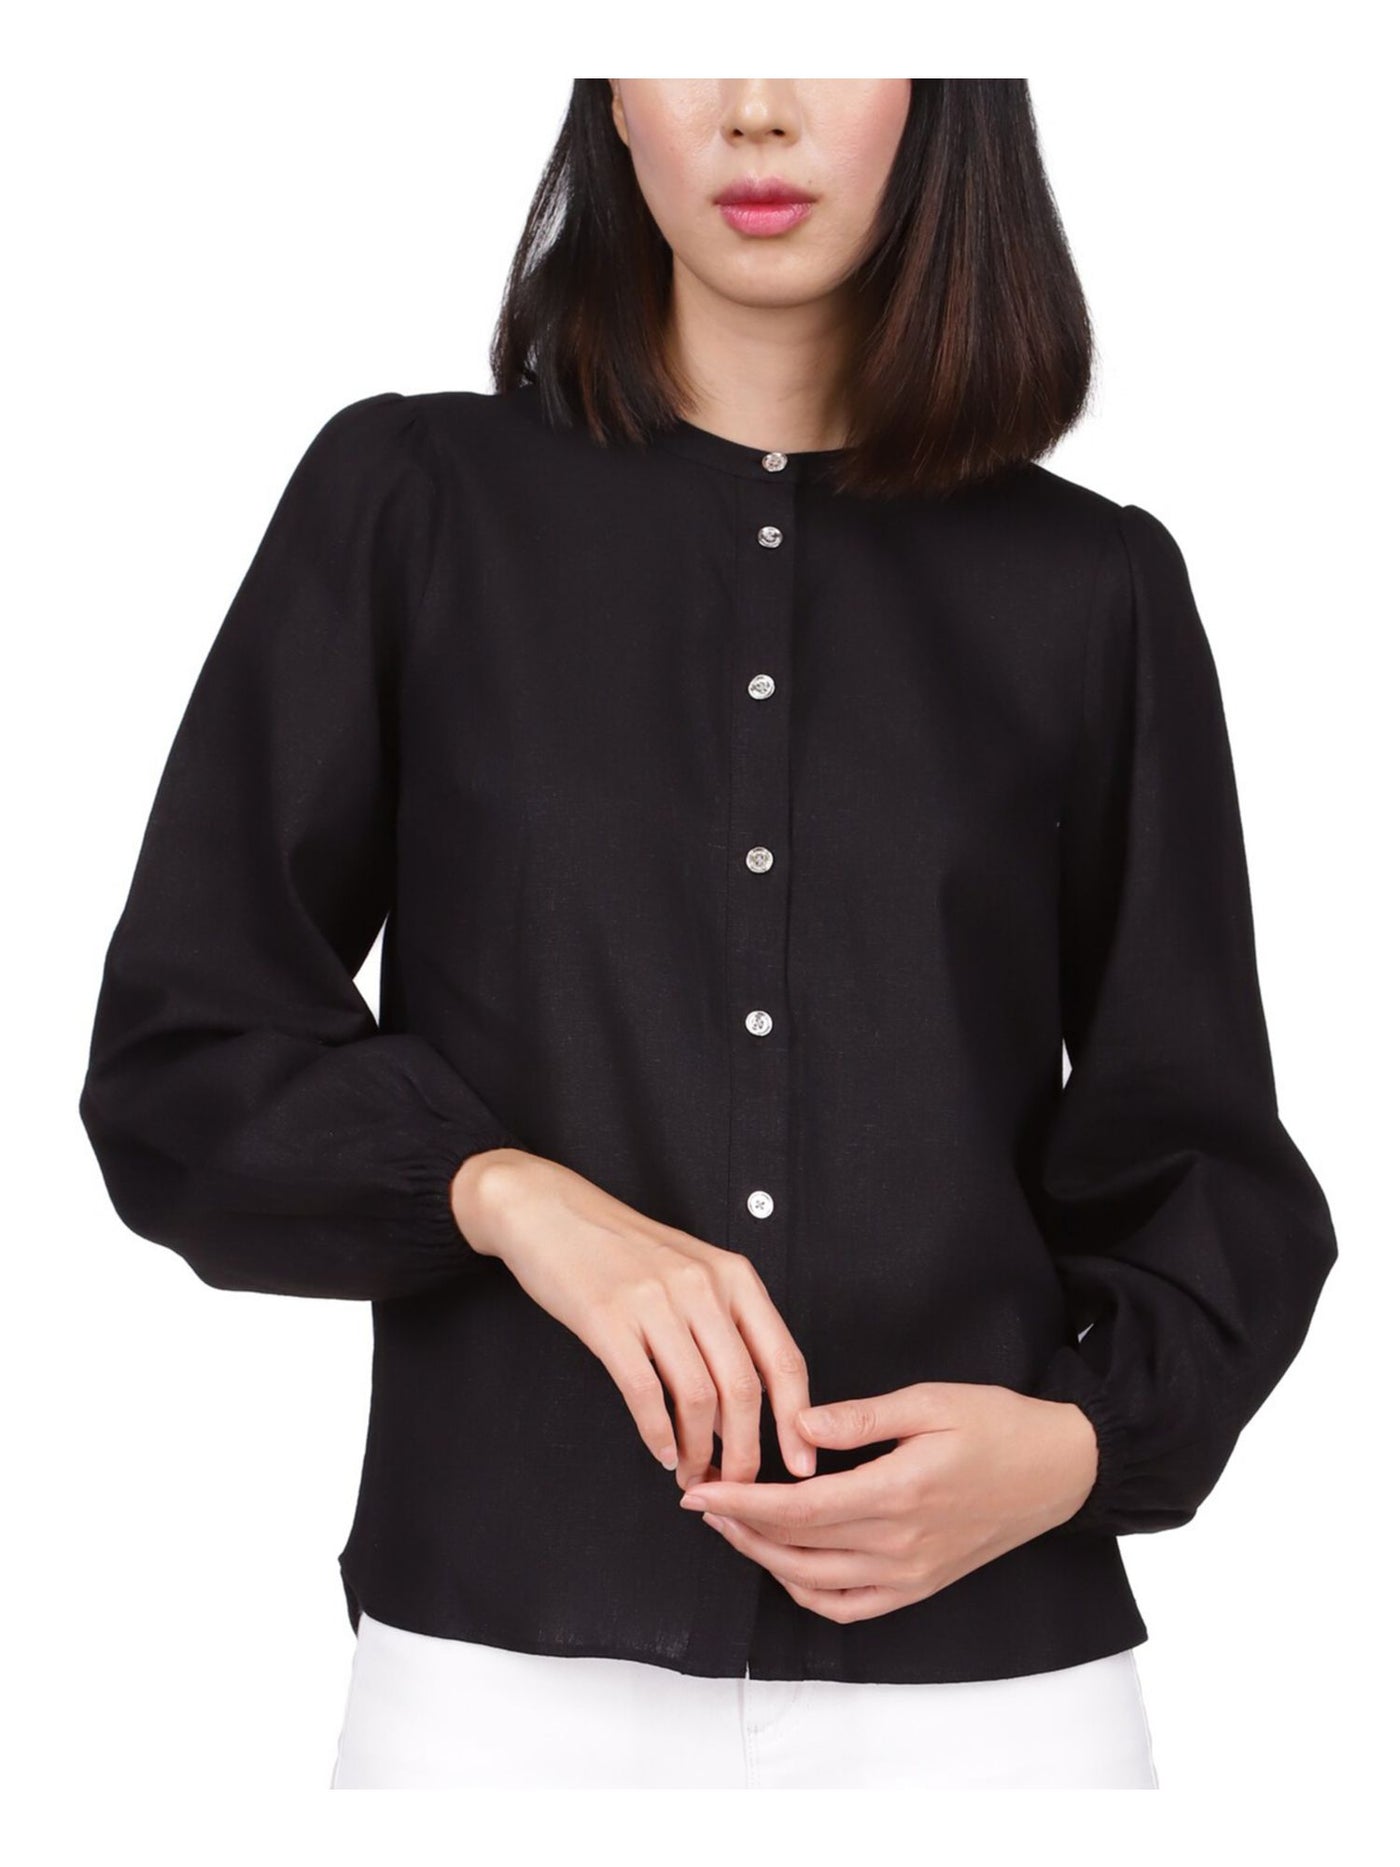 MICHAEL MICHAEL KORS Womens Black Long Sleeve Round Neck Wear To Work Button Up Top L